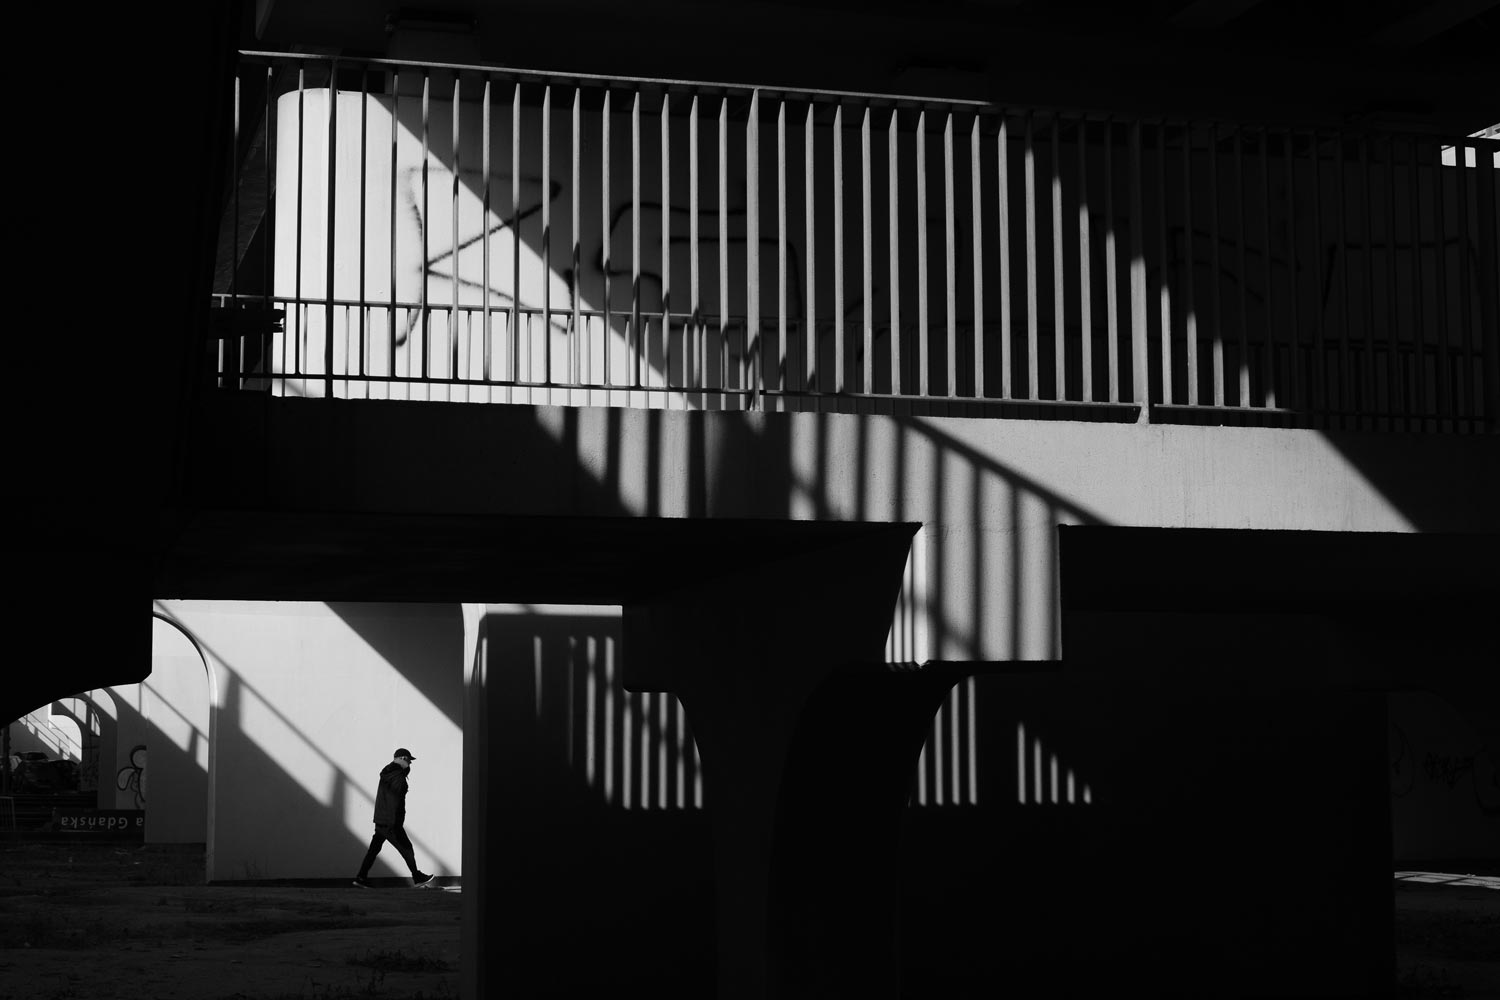 Striking photo of railings with strong shadows